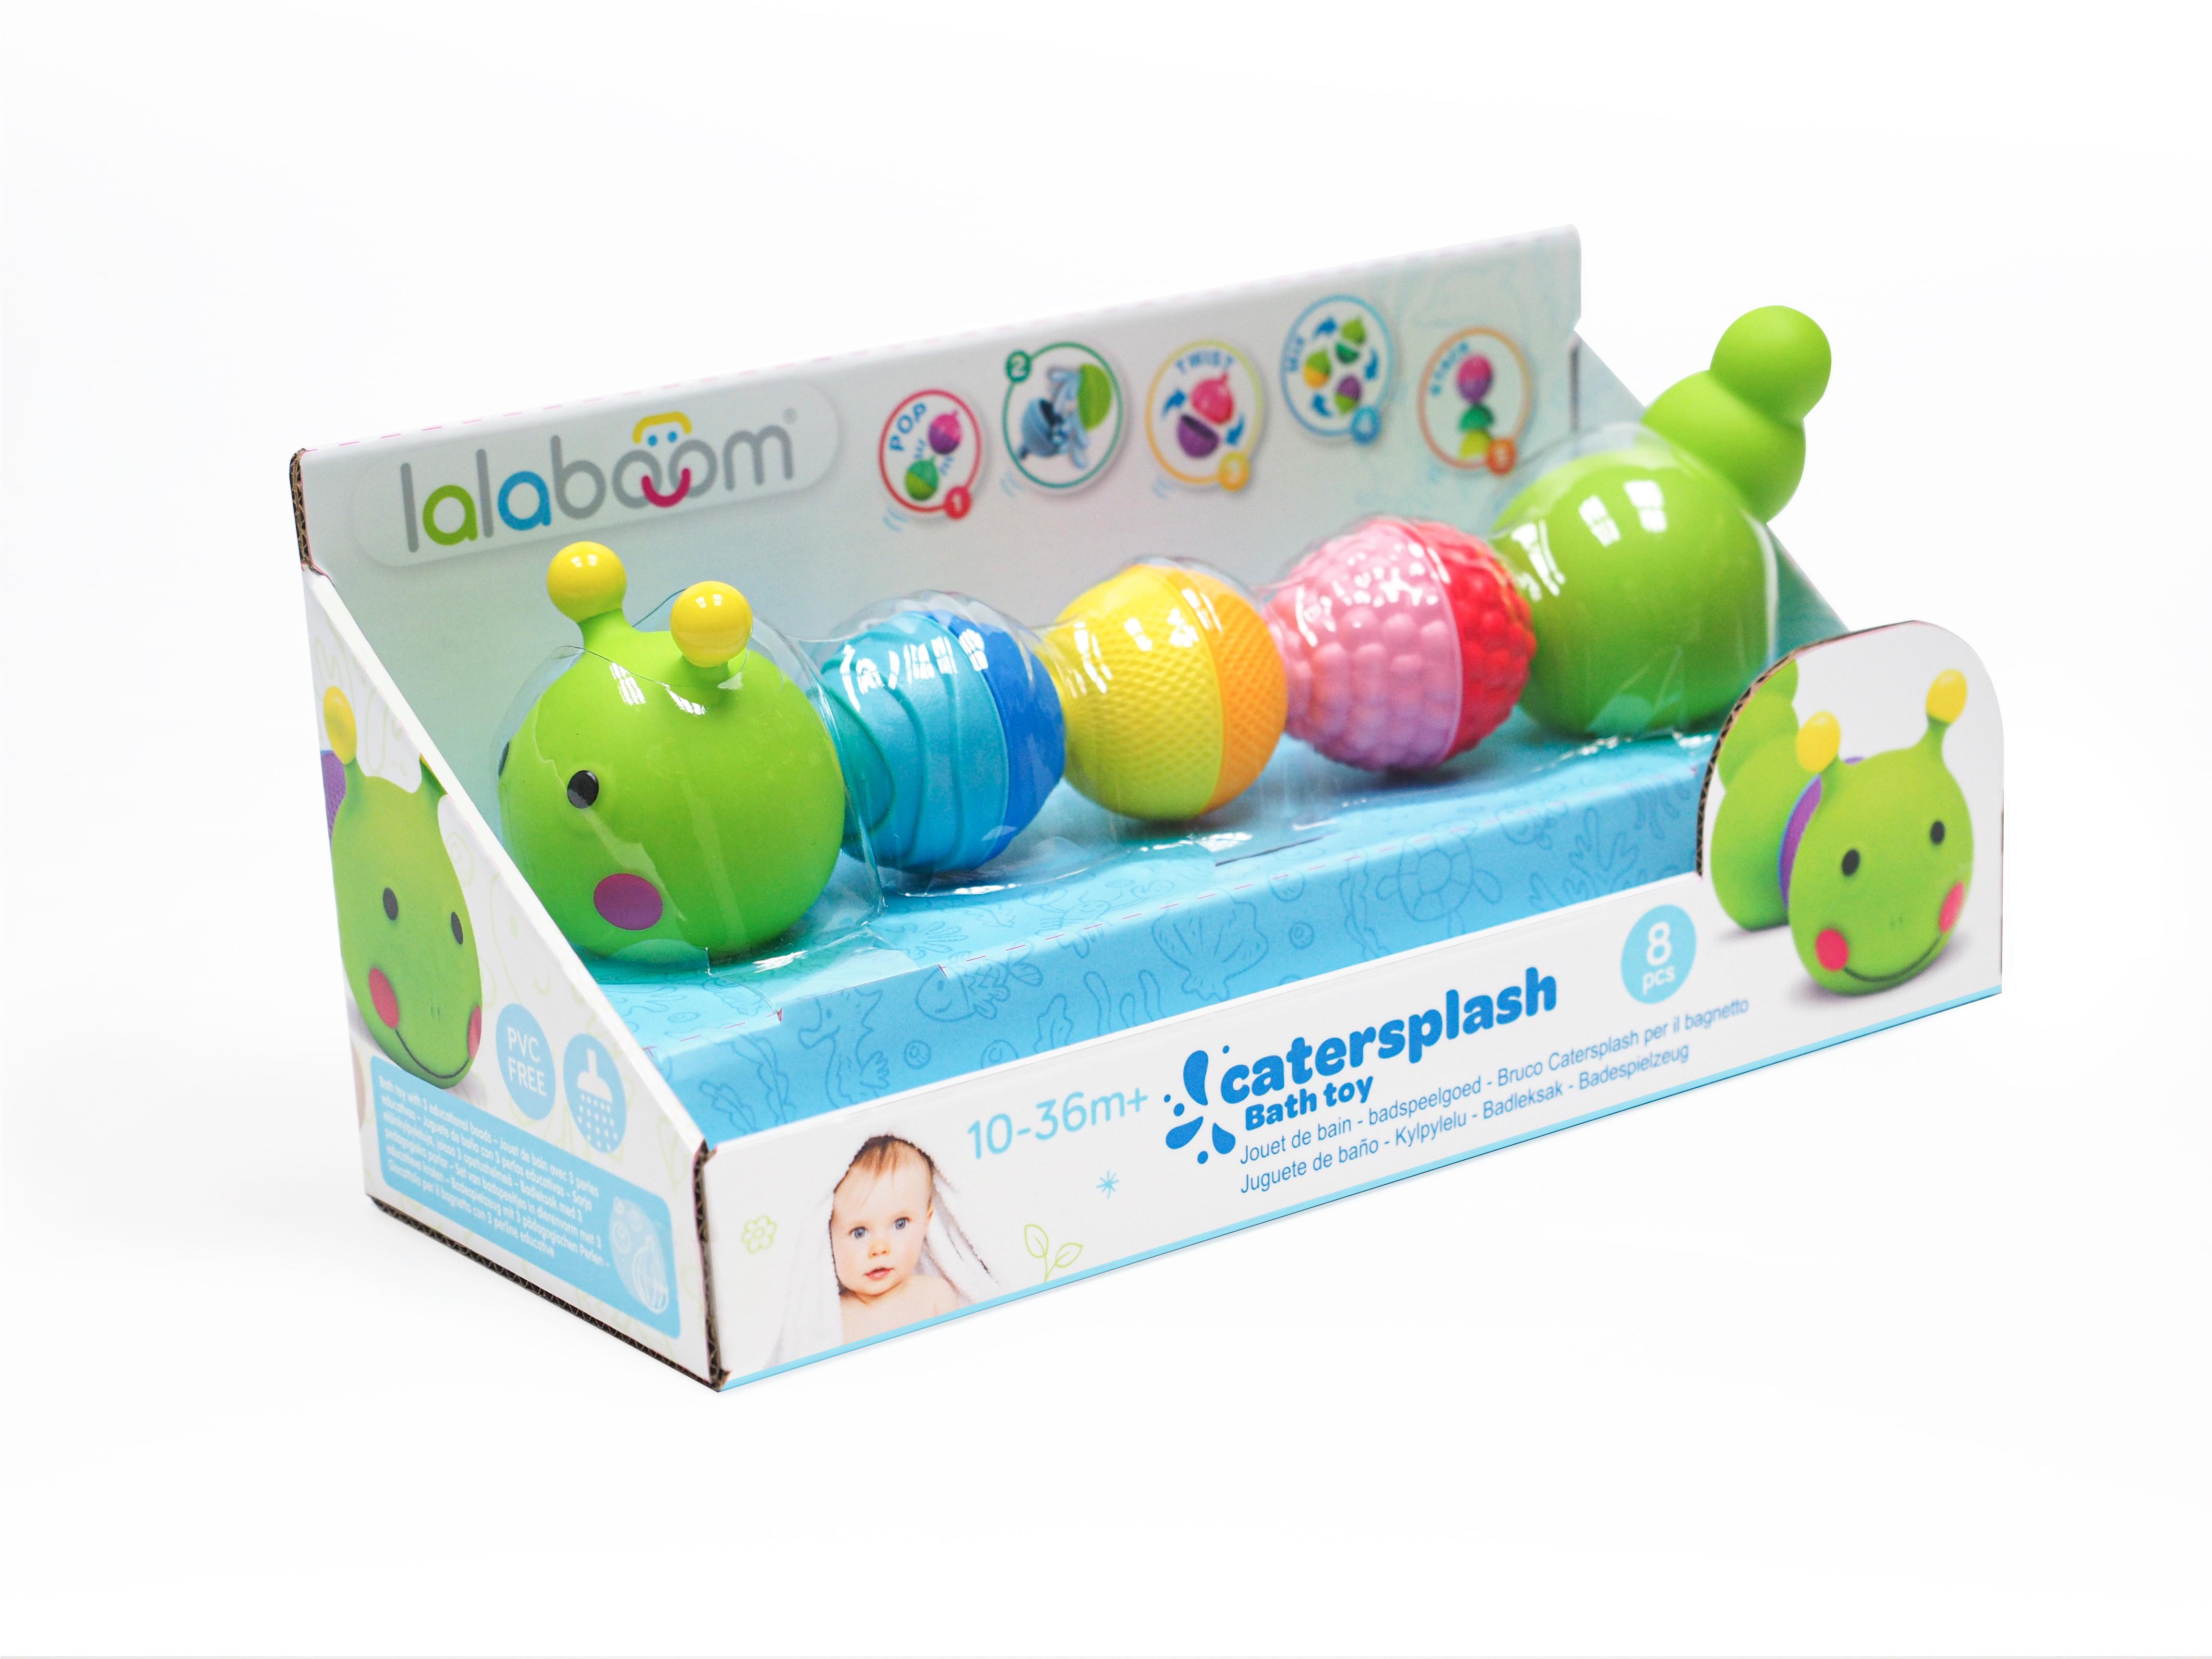 Lalaboom's fun snap together caterpillar bath toy in manufacturer's packaging.